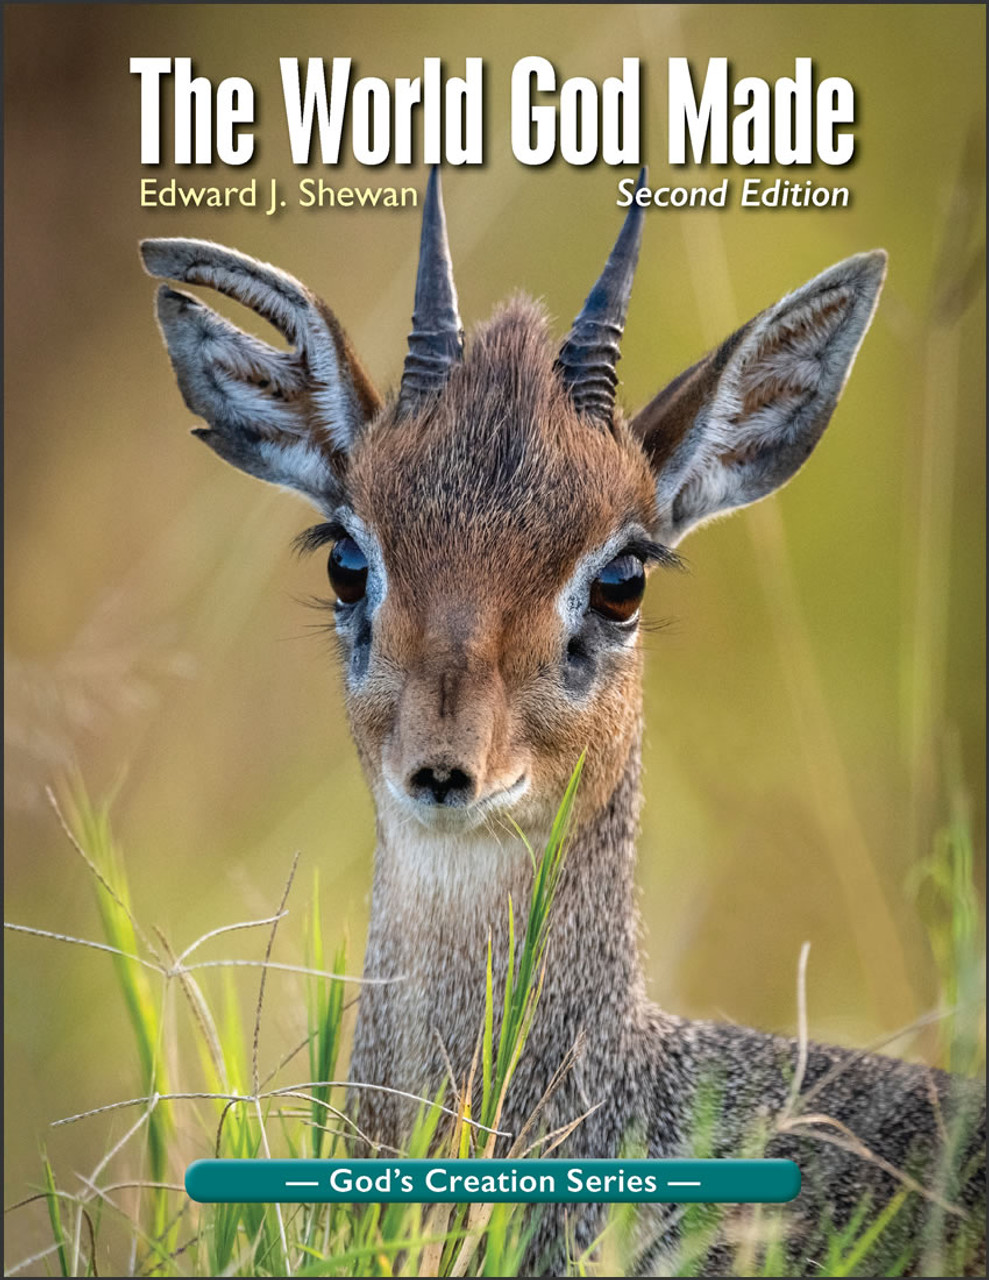 The World God Made, 2nd edition